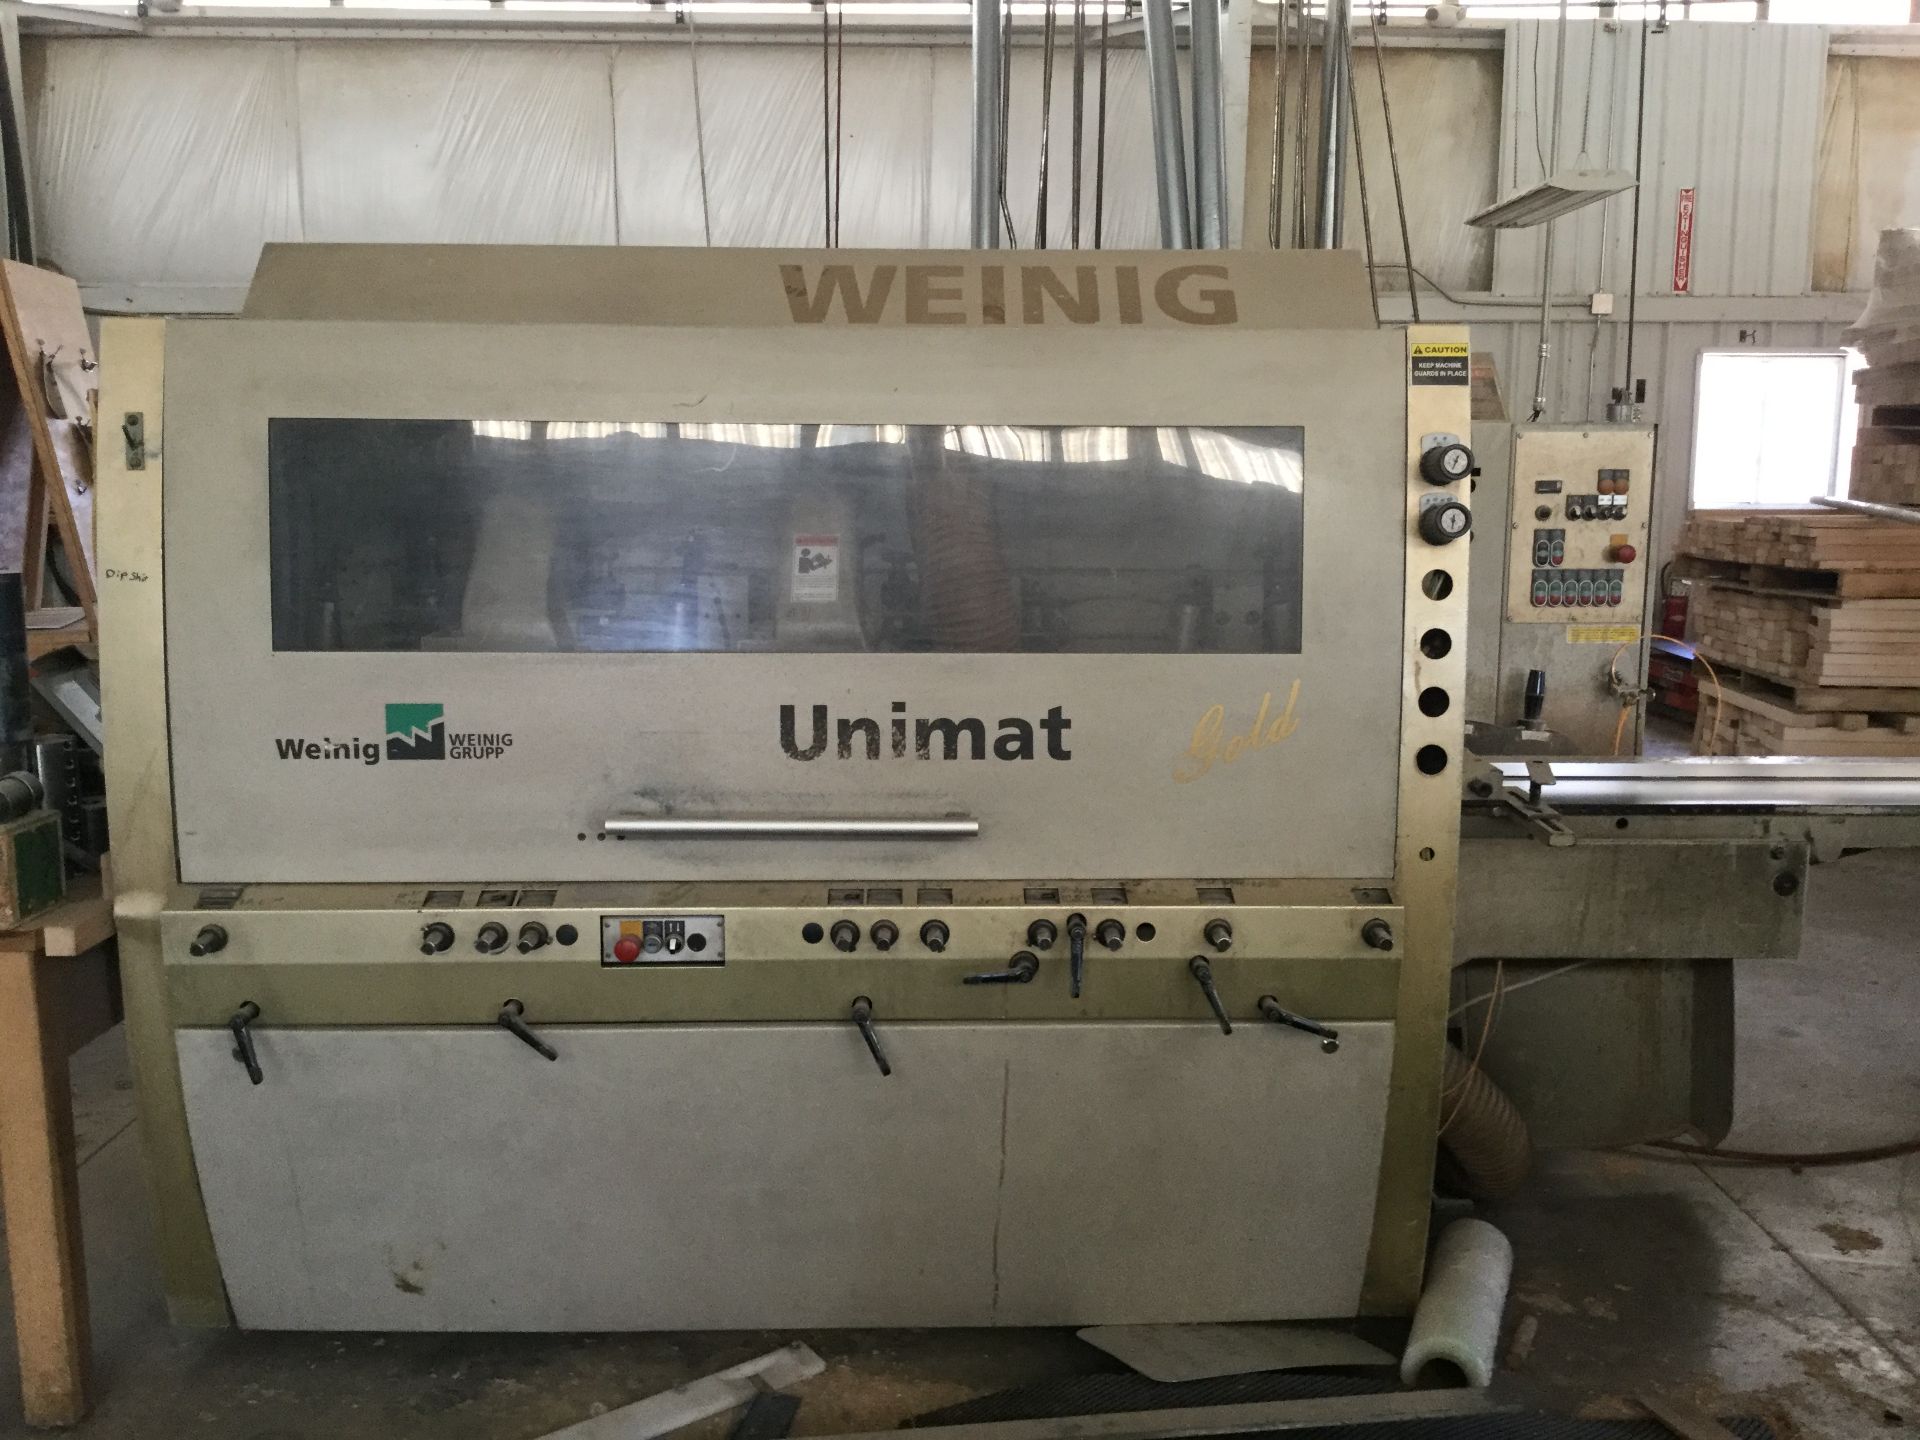 (940)LIQUDATION -WEINIG UNIMAT GOLD 6-HEAD MOLDER SER# 97268 WITH A PALLET OF TOOLING - Image 7 of 7